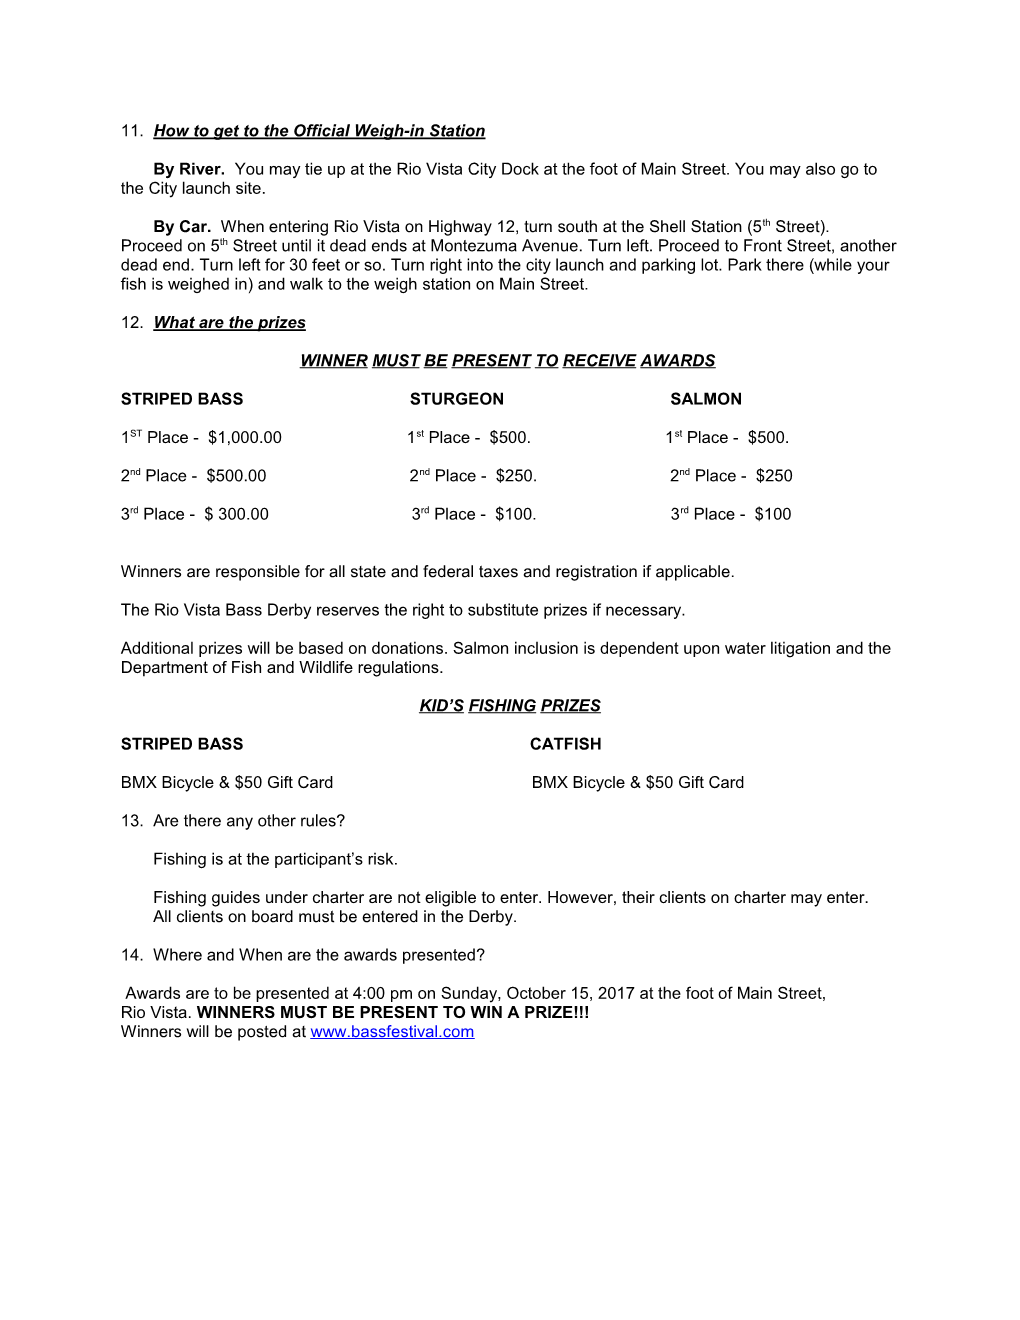 70Th Rio Vista Bass Derby Official Rules and Regulations